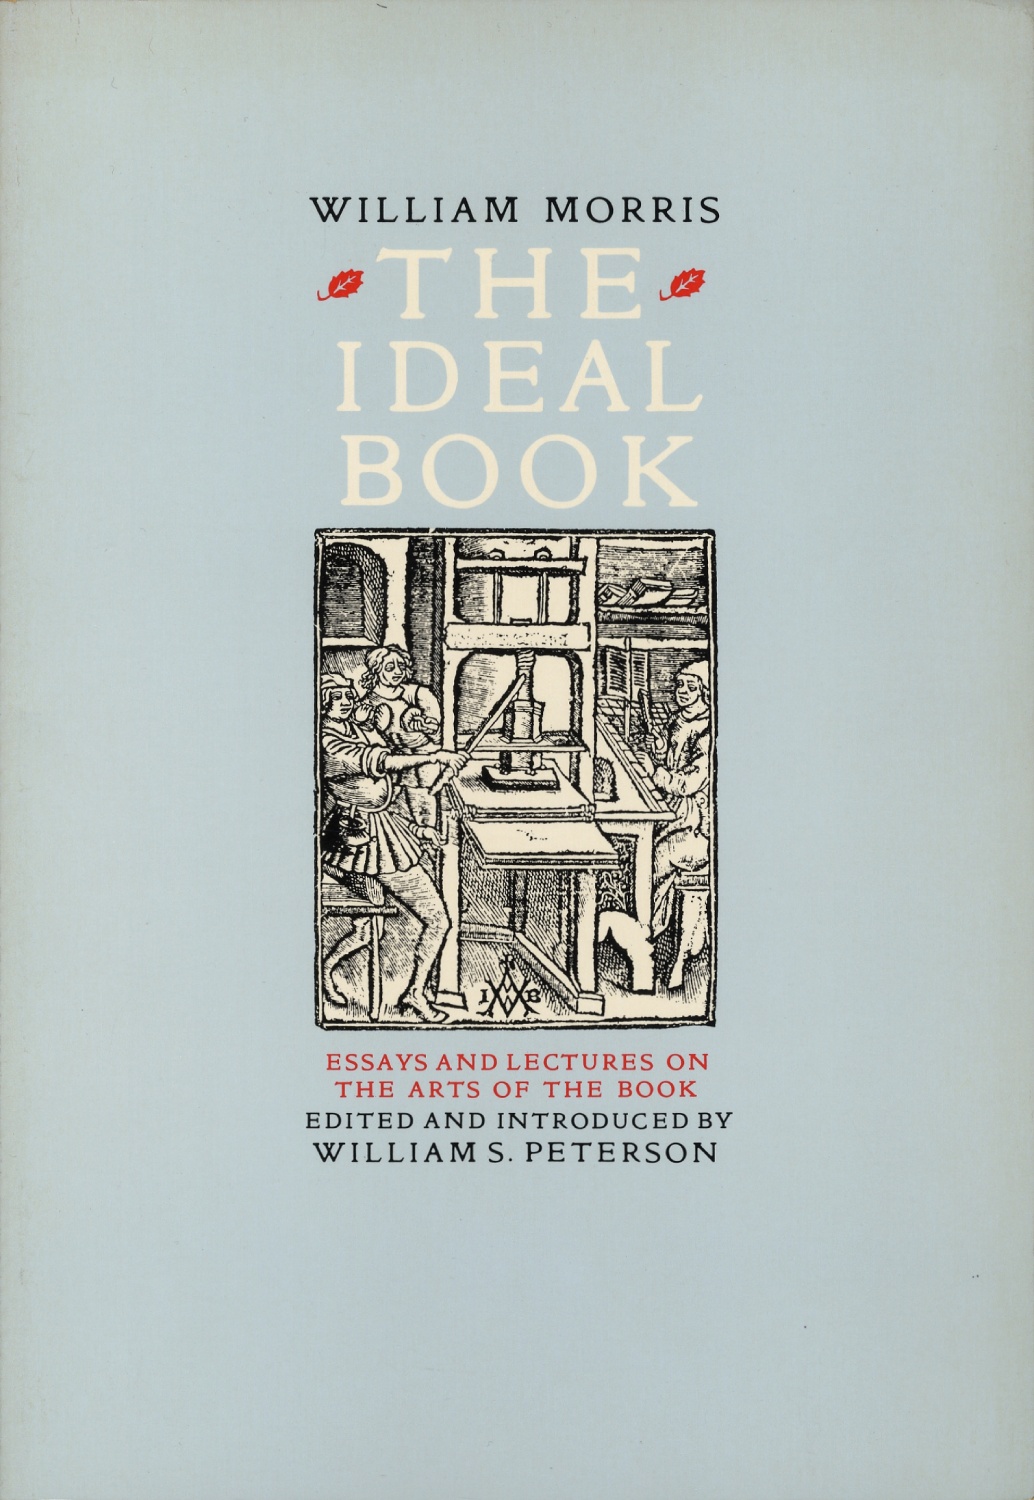 The Ideal Book　Essays and Lectures on the Arts of the Book［image1］